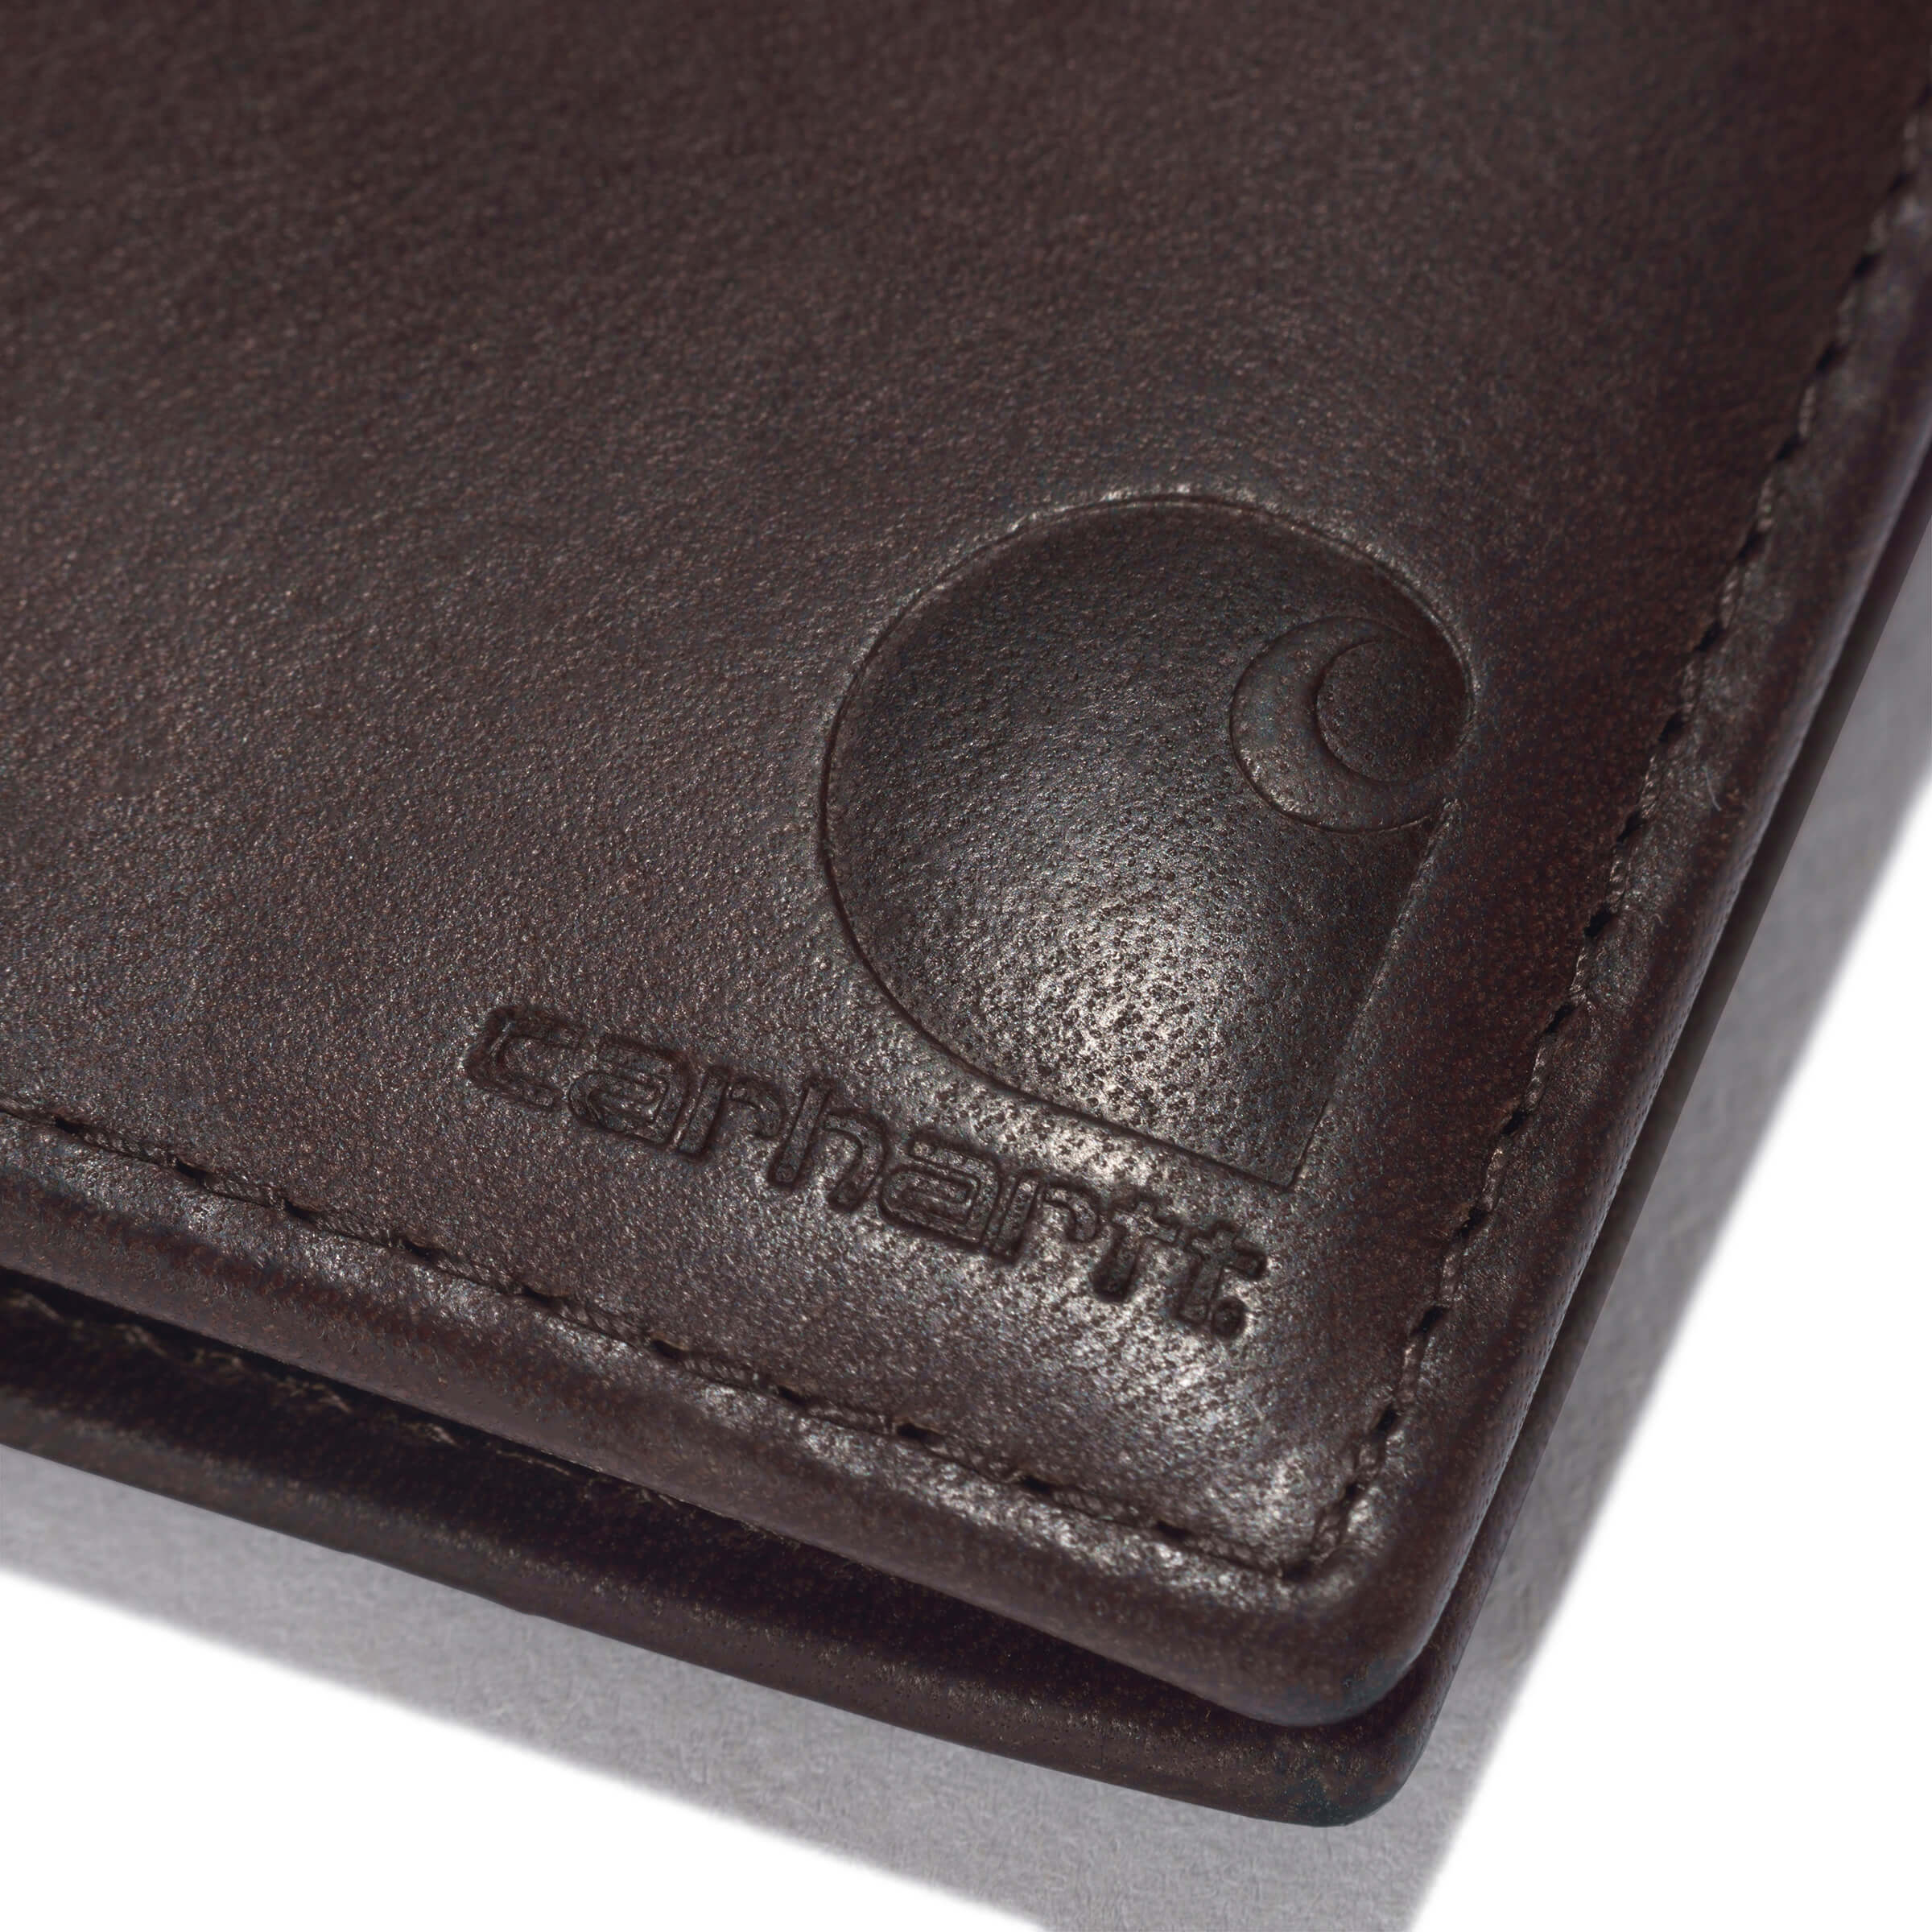 B000021820 - Carhartt Oil Tan Leather Passcase Wallet Brown